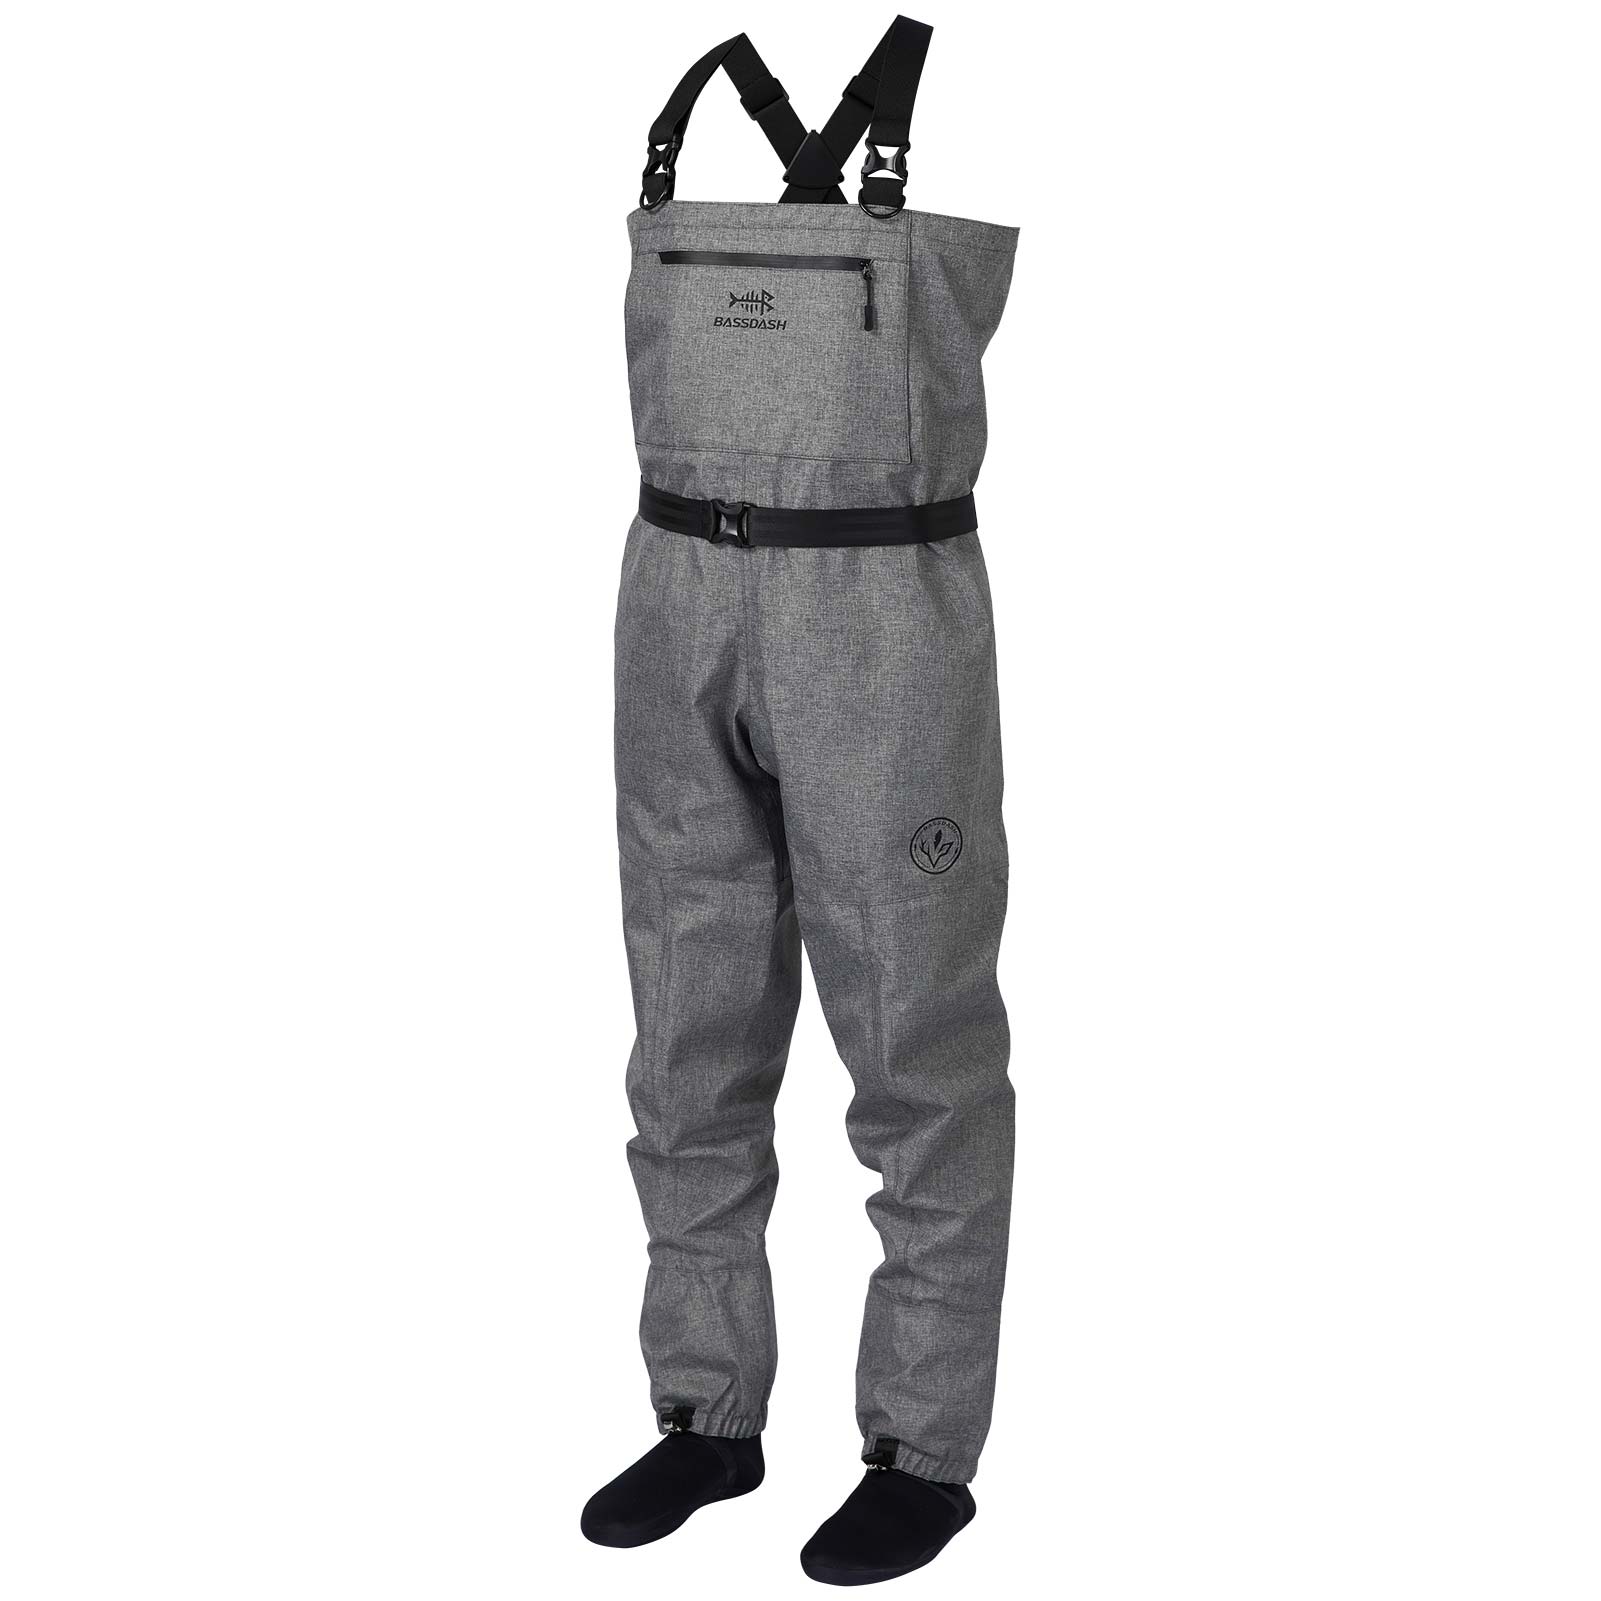 Men's Immerse Breathable Ripstop Wader - Stocking Foot Heather Grey / Small 7-8